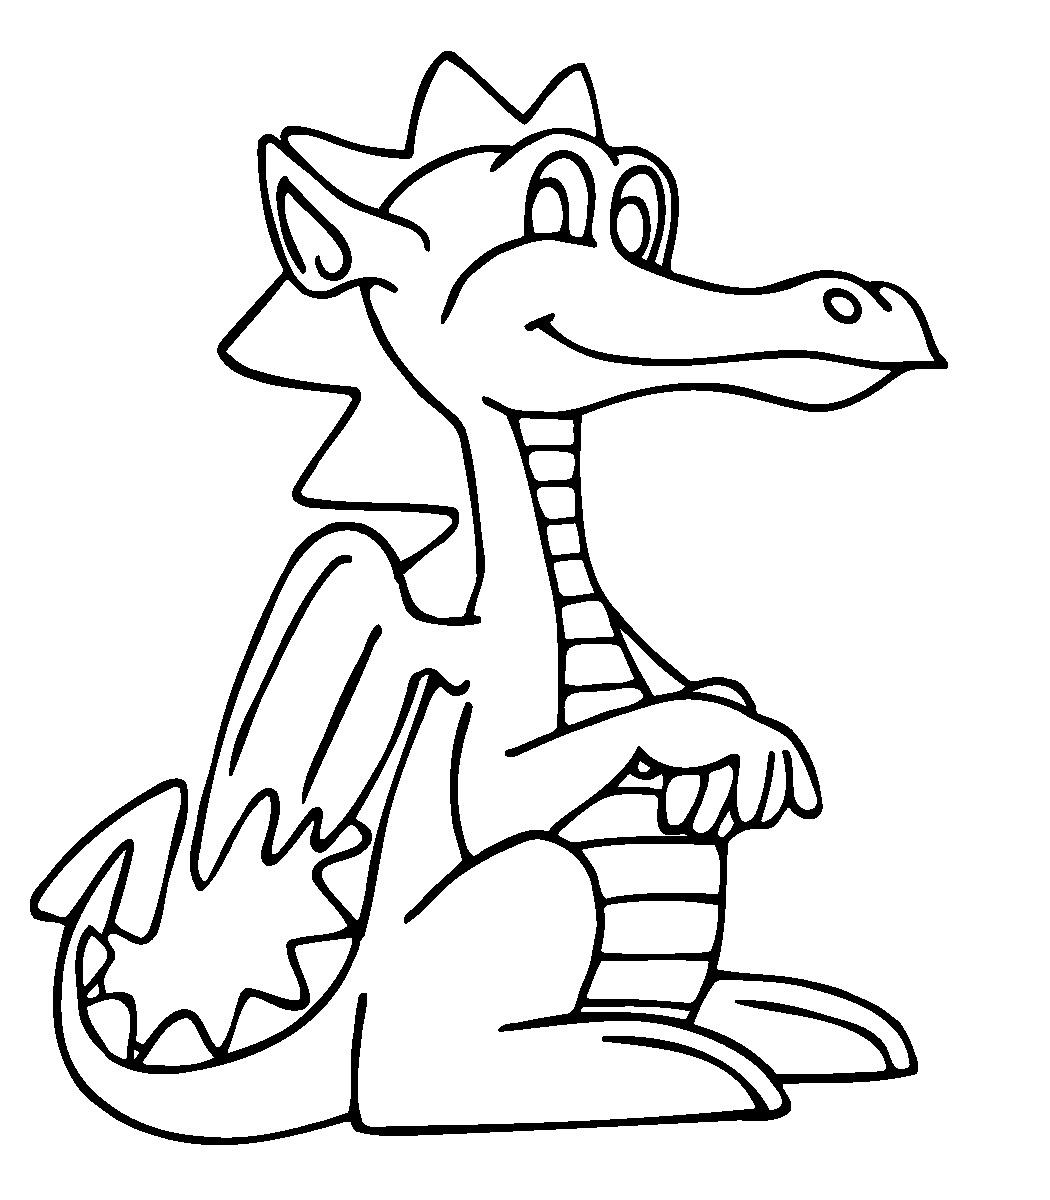 Dragon Clipart Black And White Free   Clipart Panda   Free Clipart    